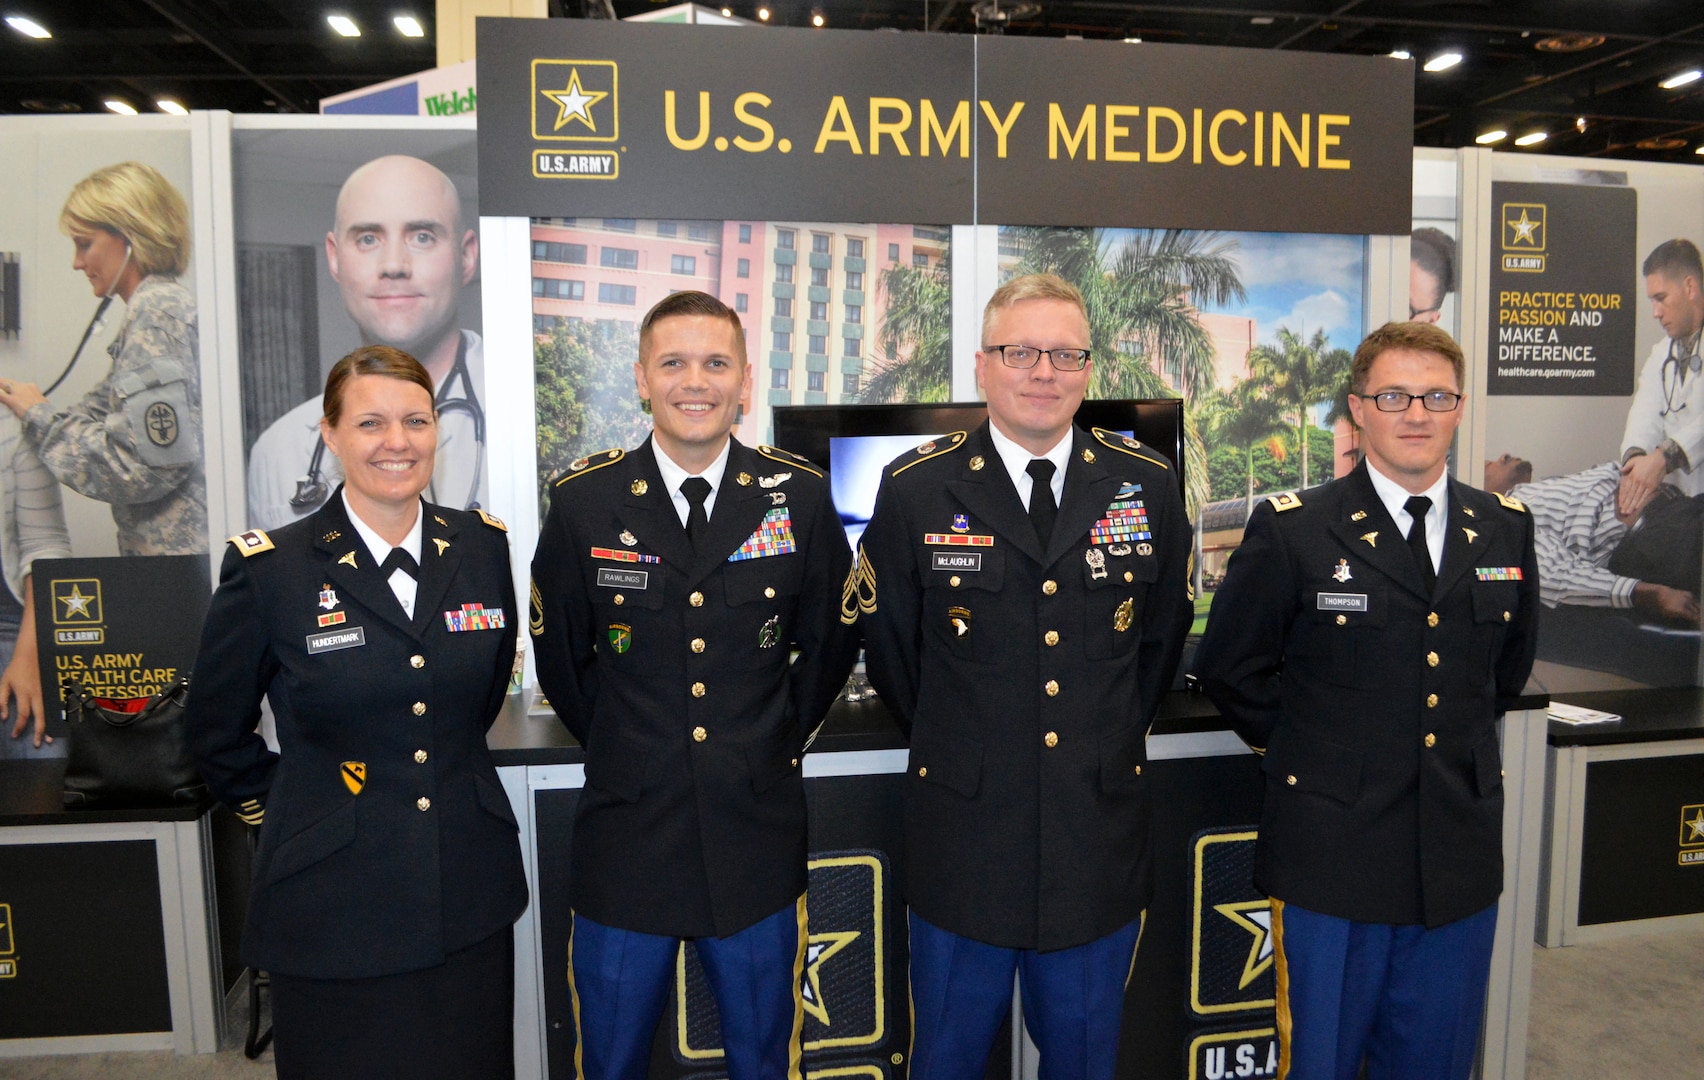 (From left) Army Lt. Col. Julie Hundertmark, Army Medical Corps recruiting integration officer with the Medical Recruiting Brigade at Fort Knox, Ky., Army Sgts. 1st Class Colin Rawlings and Chad McLaughlin, of the San Antonio Medical Recruiting Center, and Army Maj. Timothy Thompson, an active duty family medicine physician and teaching faculty member at the Martin Army Community Hospital Family Medicine Residency Program in Fort Benning, Ga., pose in front of the Army exhibit at the American Academy of Family Physicians Family Medicine Experience 2017 or FMX 2017, Sept. 14 at the Henry B. Gonzales Convention Center in downtown San Antonio.